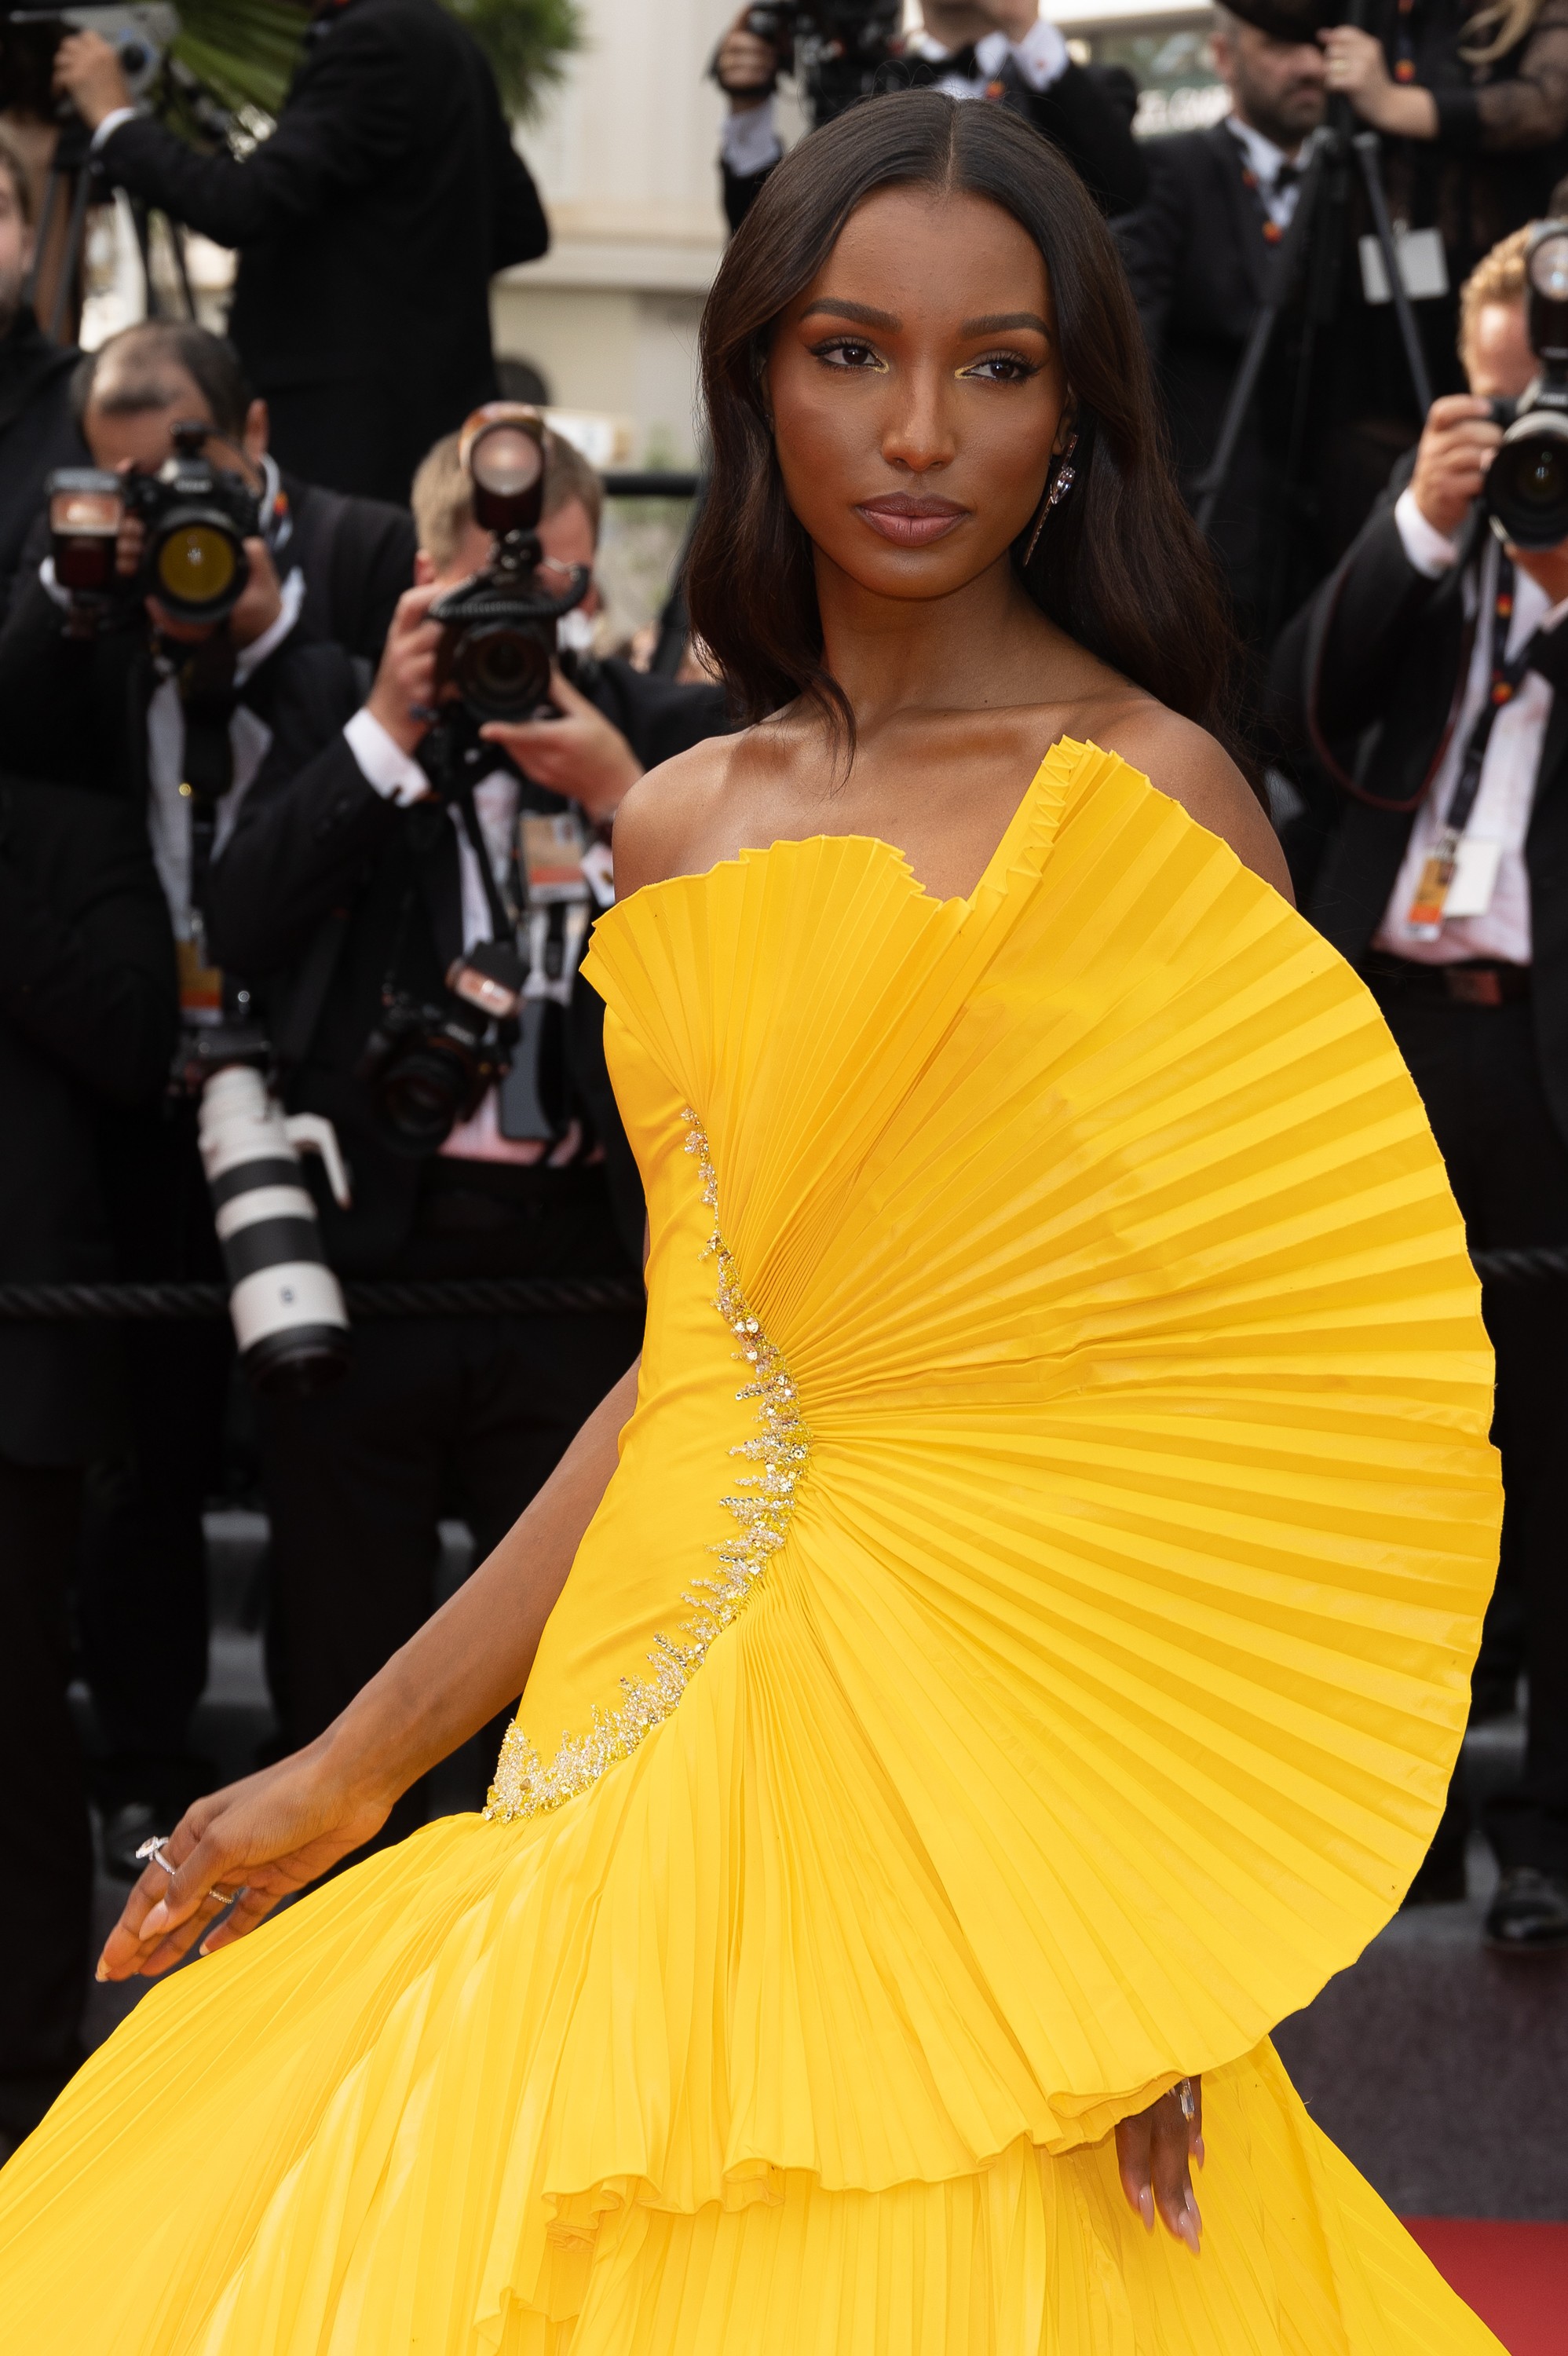 CANNES, FRANCE - MAY 18: Jasmine Tookes attends the screening of "Top Gun: Maverick" during the 75th annual Cannes film festival at Palais des Festivals on May 18, 2022 in Cannes, France. (Photo by Marc Piasecki/FilmMagic) (Foto: FilmMagic)